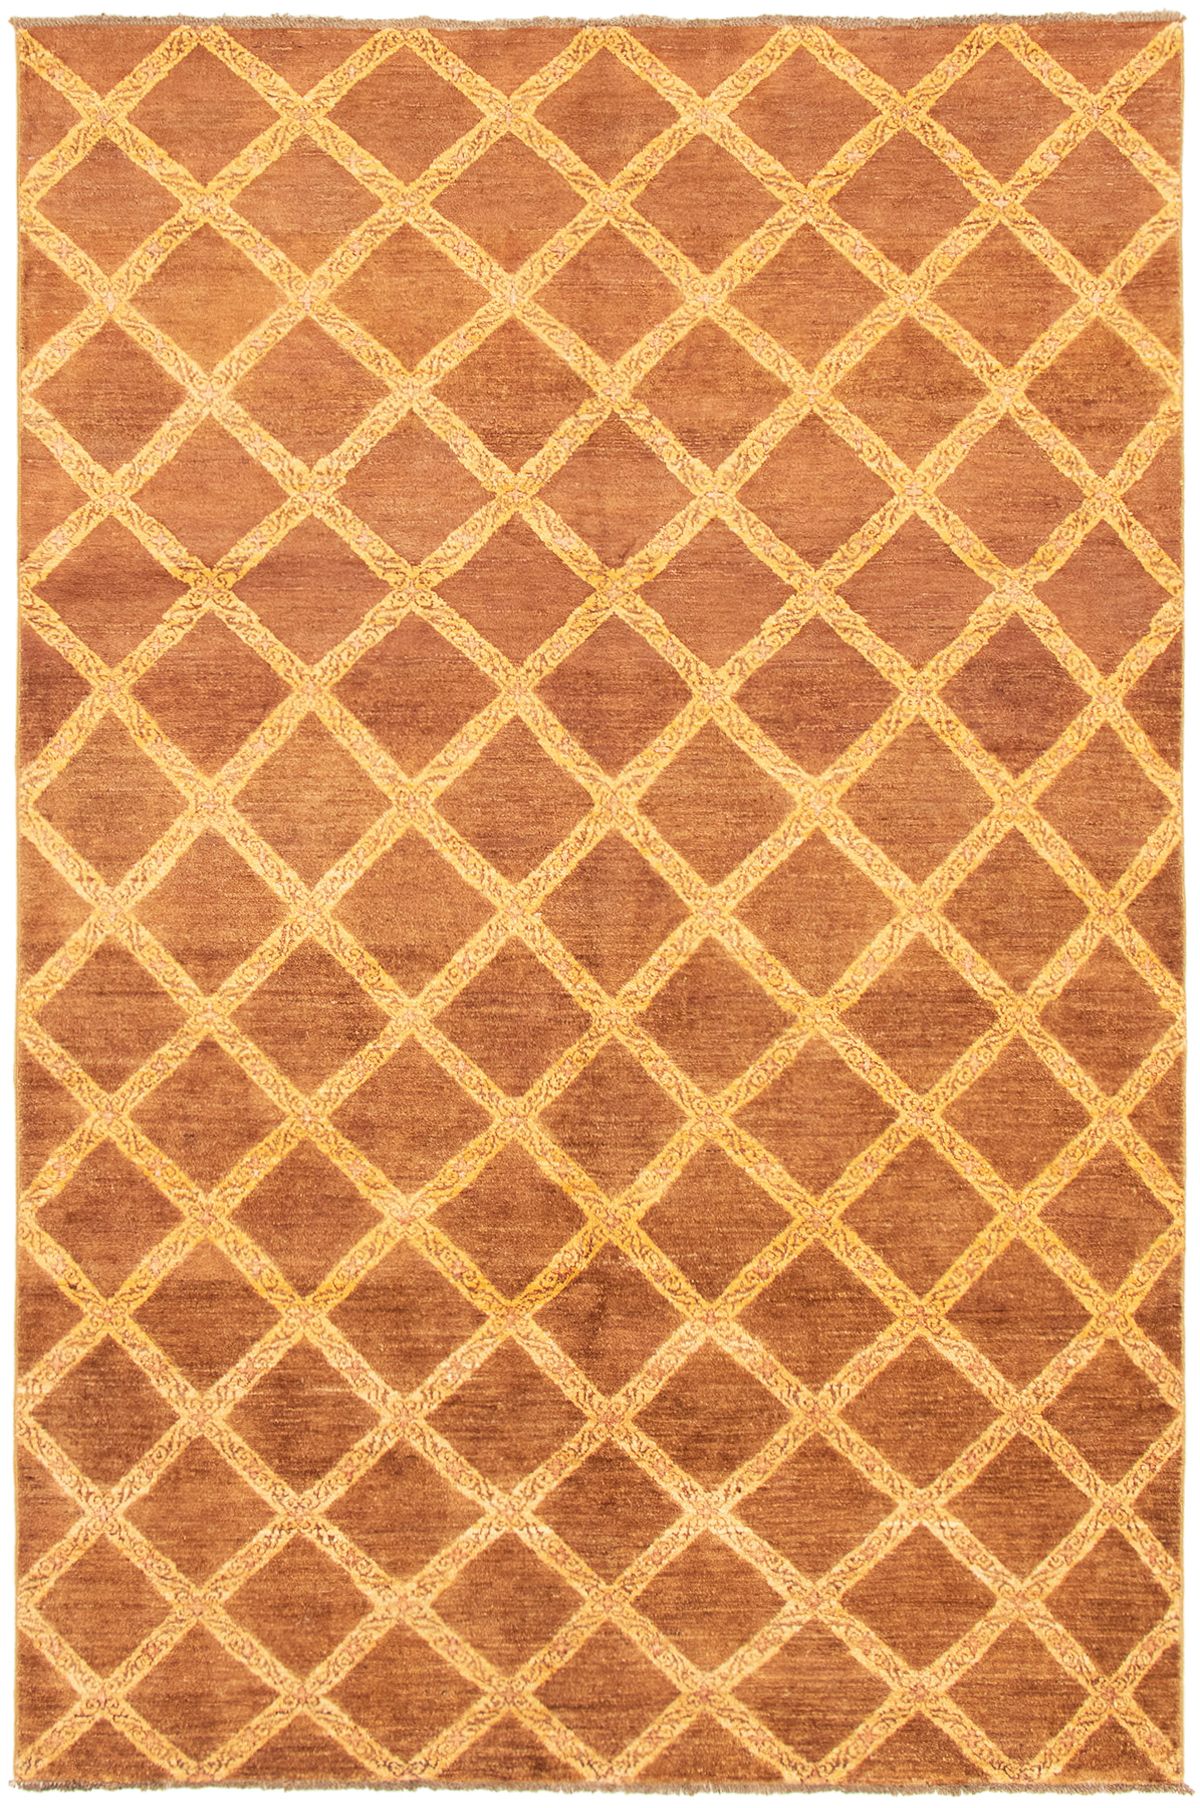 Hand-knotted Finest Ziegler Chobi Brown Wool Rug 6'6" x 9'10" Size: 6'6" x 9'10"  